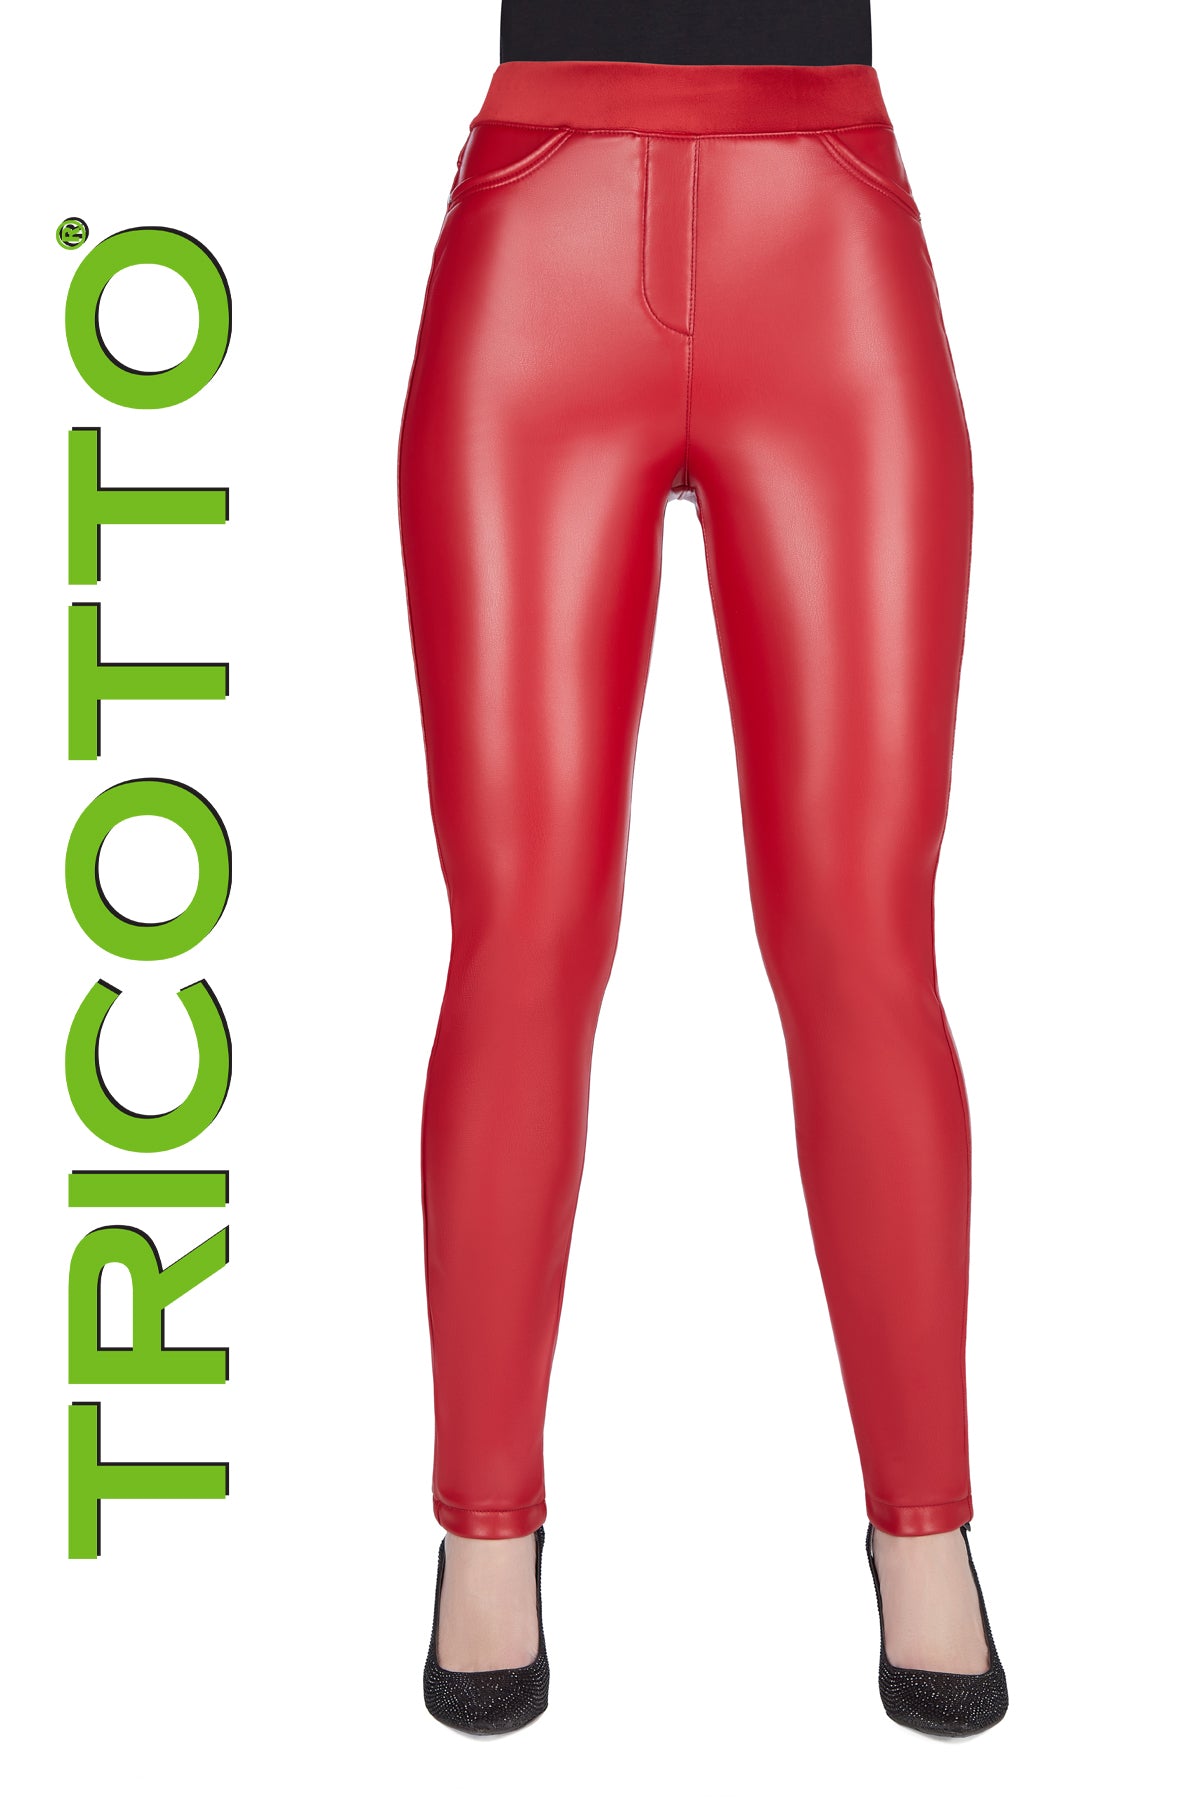 Tricotto Red Pant-Tricotto Vegan Leather Pant-Buy Tricotto Pants Online-Tricotto Clothing Montreal-Tricotto Online Shop